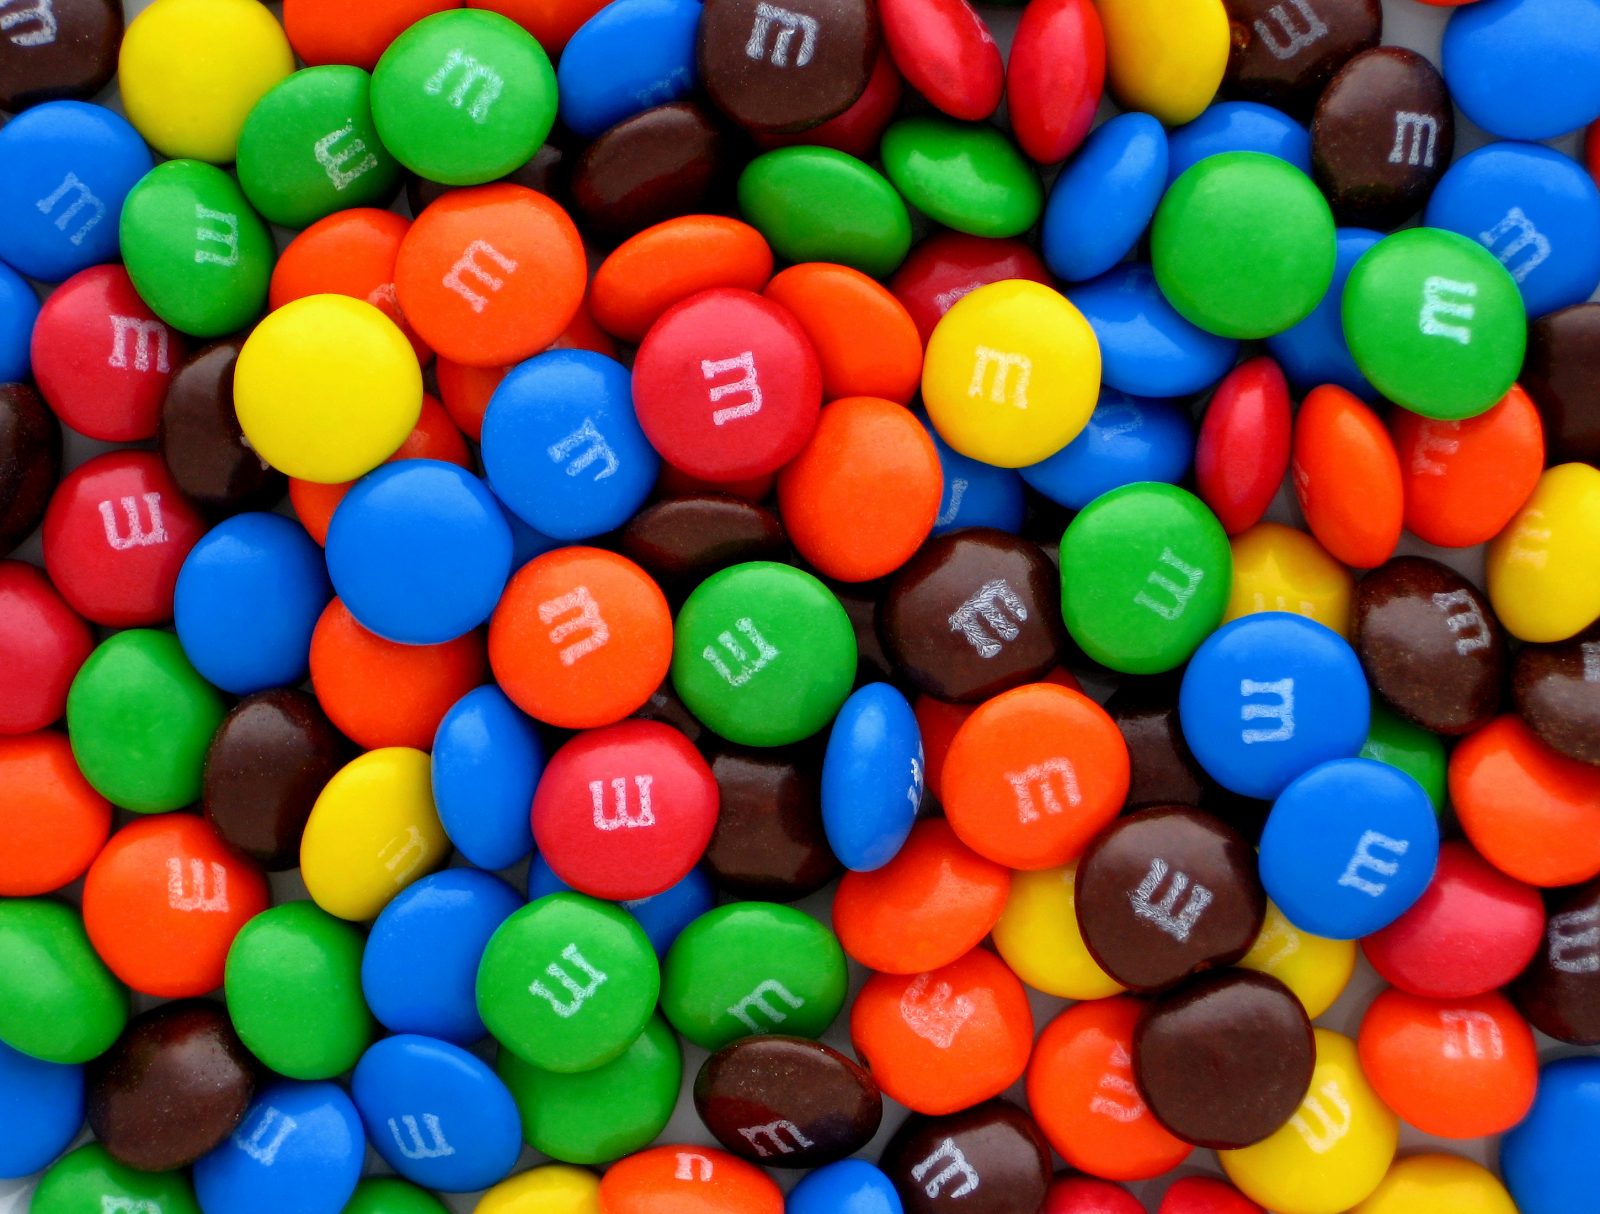 If You Get 11/15 on This Random Knowledge Quiz, You Have Infinite Wisdom Plain M&ms Pile